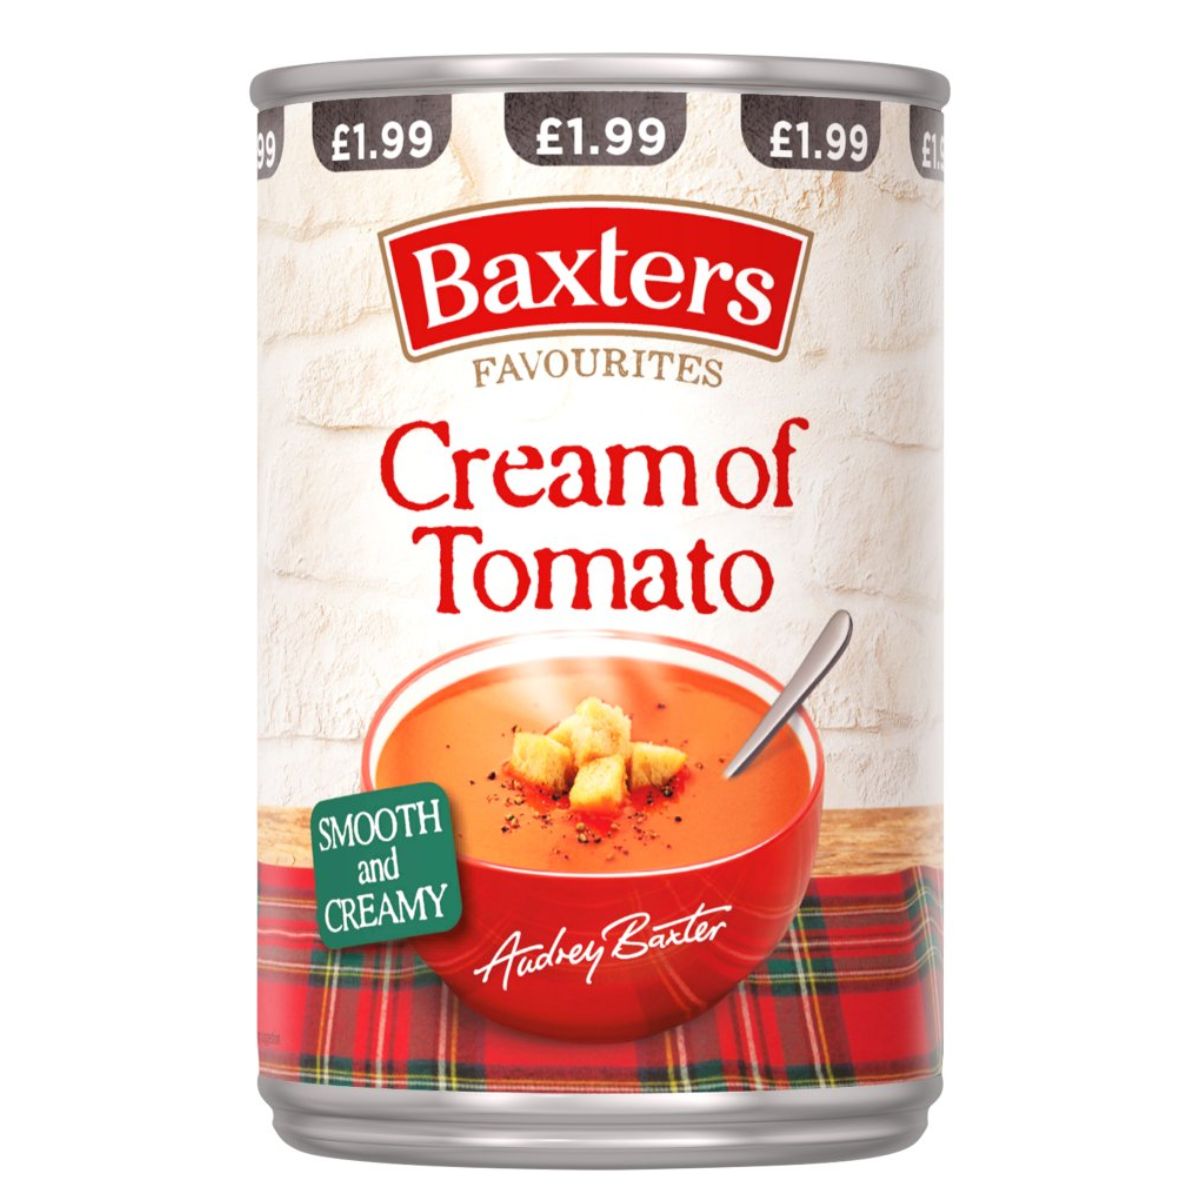 Baxters - Favourites Cream of Tomato - 400g from Baxters.